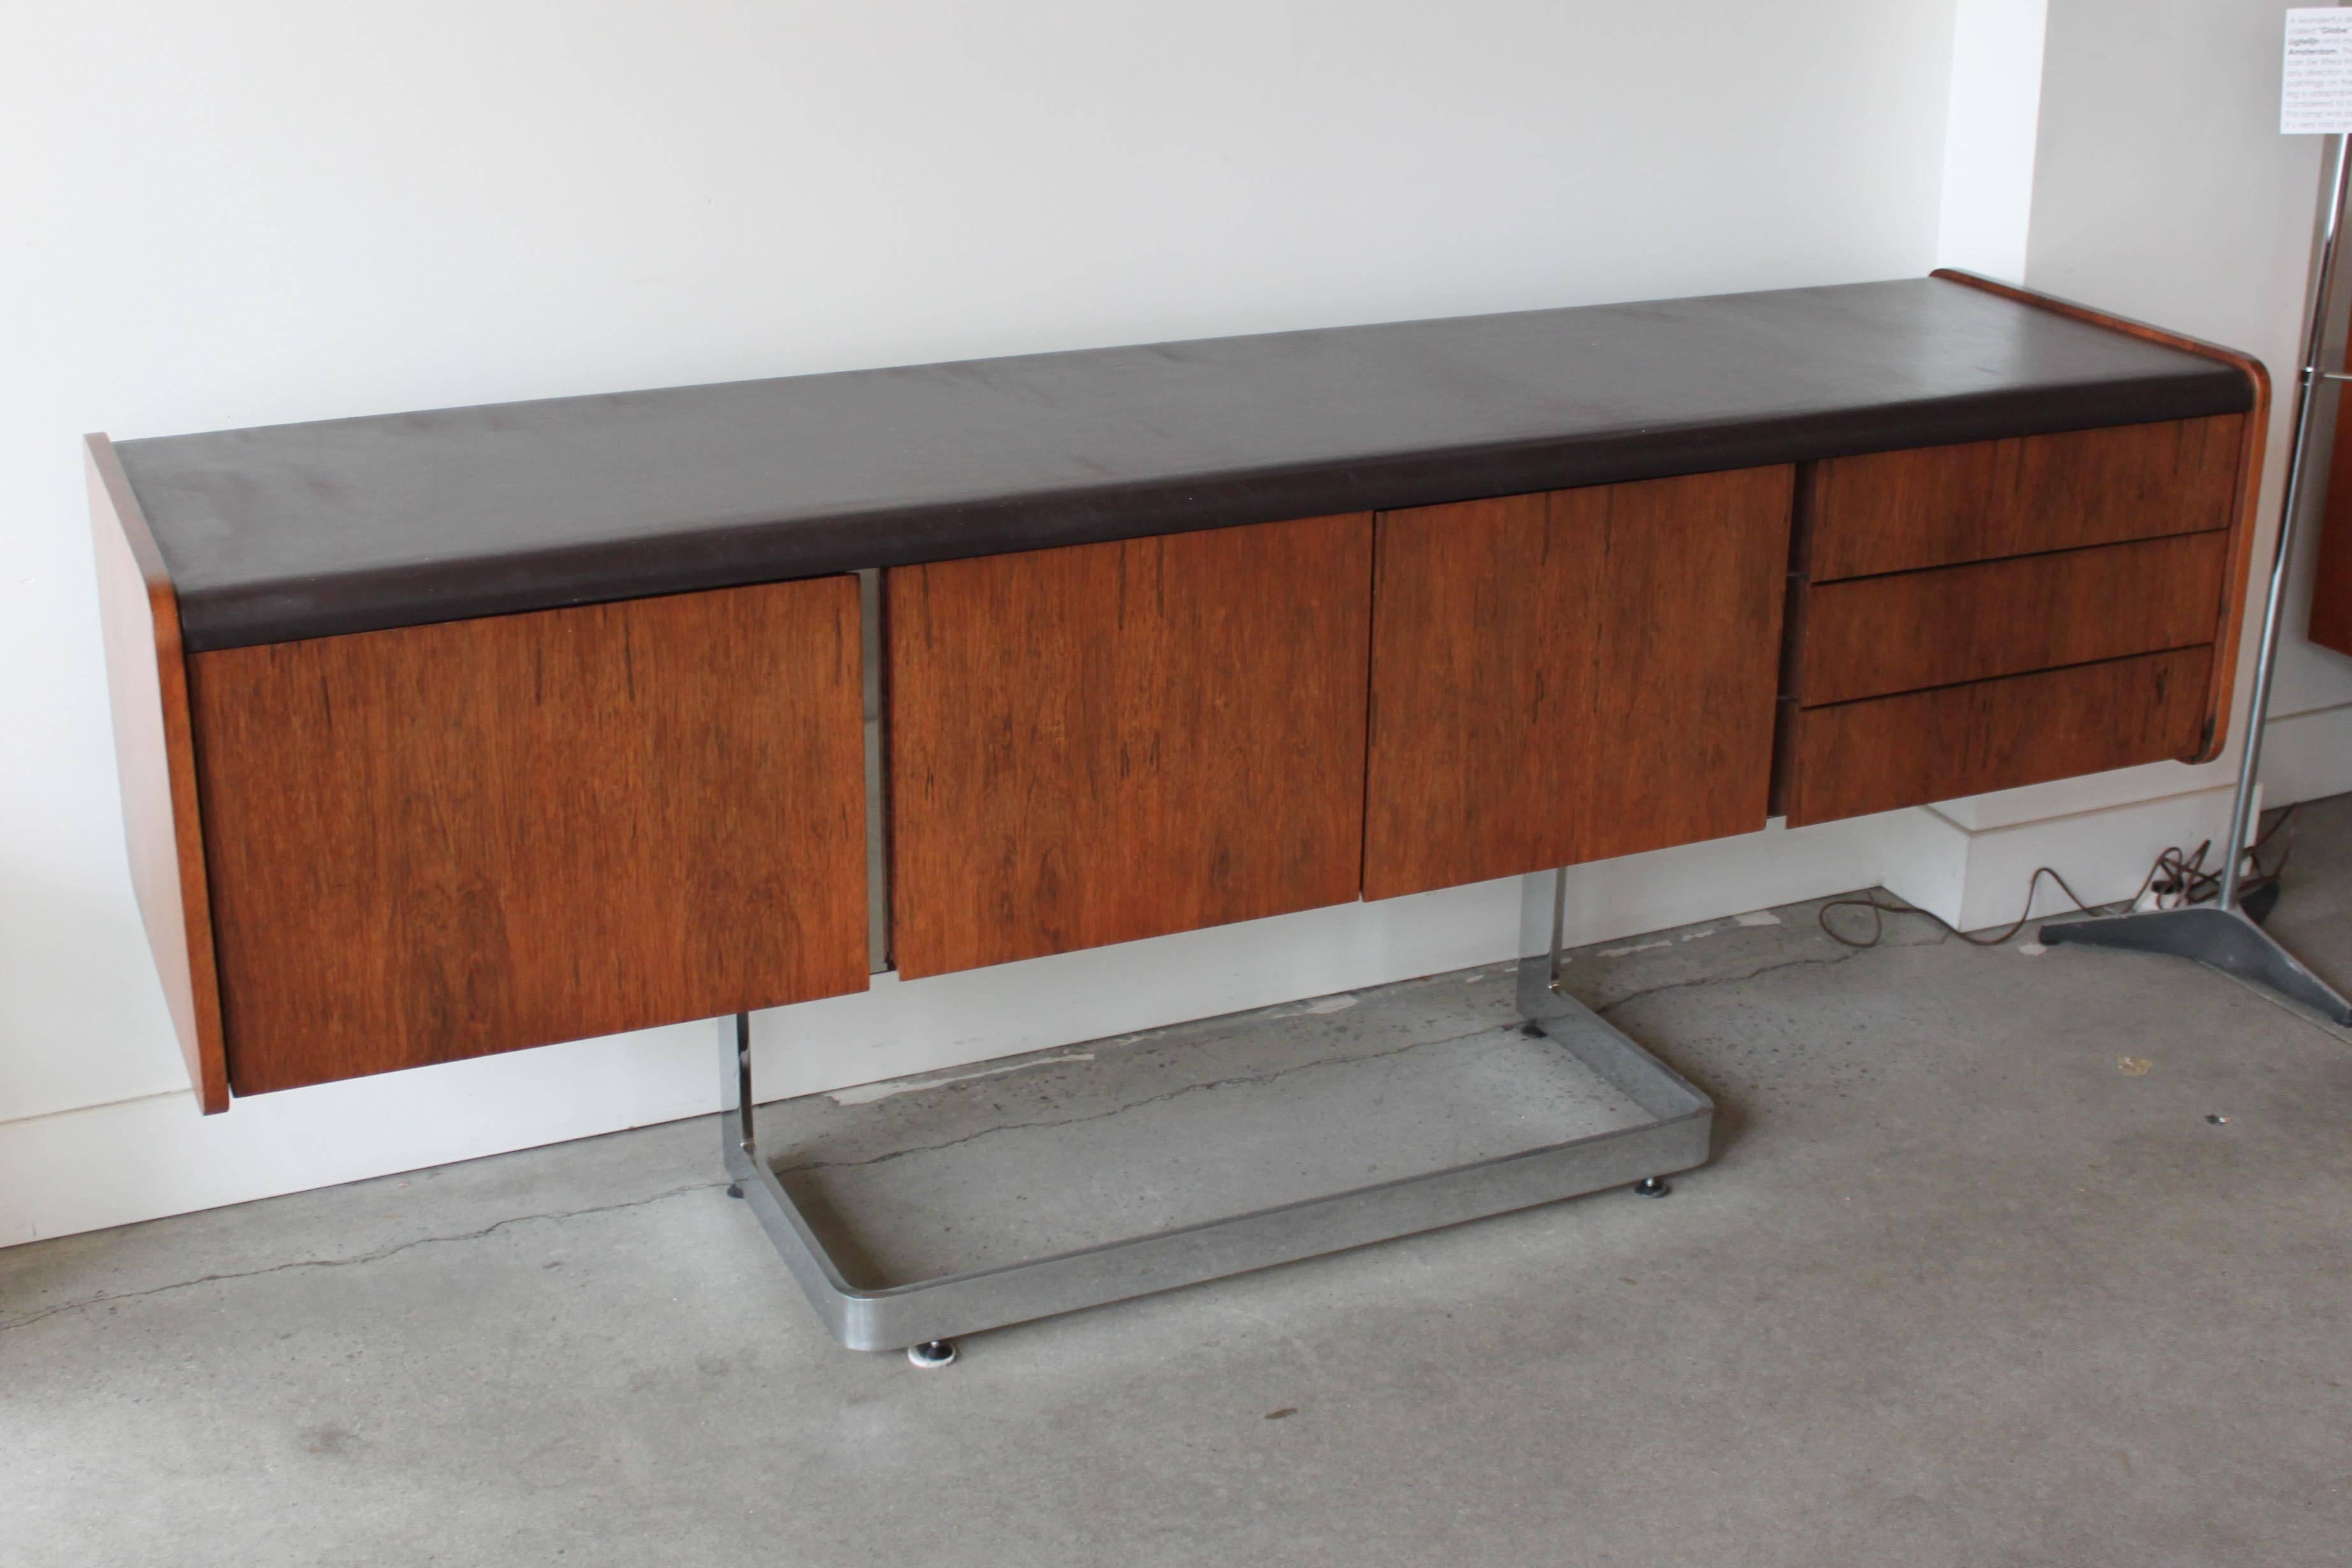 A beautiful credenza by Ste. Marie and Laurent with black leather top, deep file drawer, three single drawers and center storage cabinet. The whole is cantilevered onto a polished chrome base. In good original condition with minor wear consistent